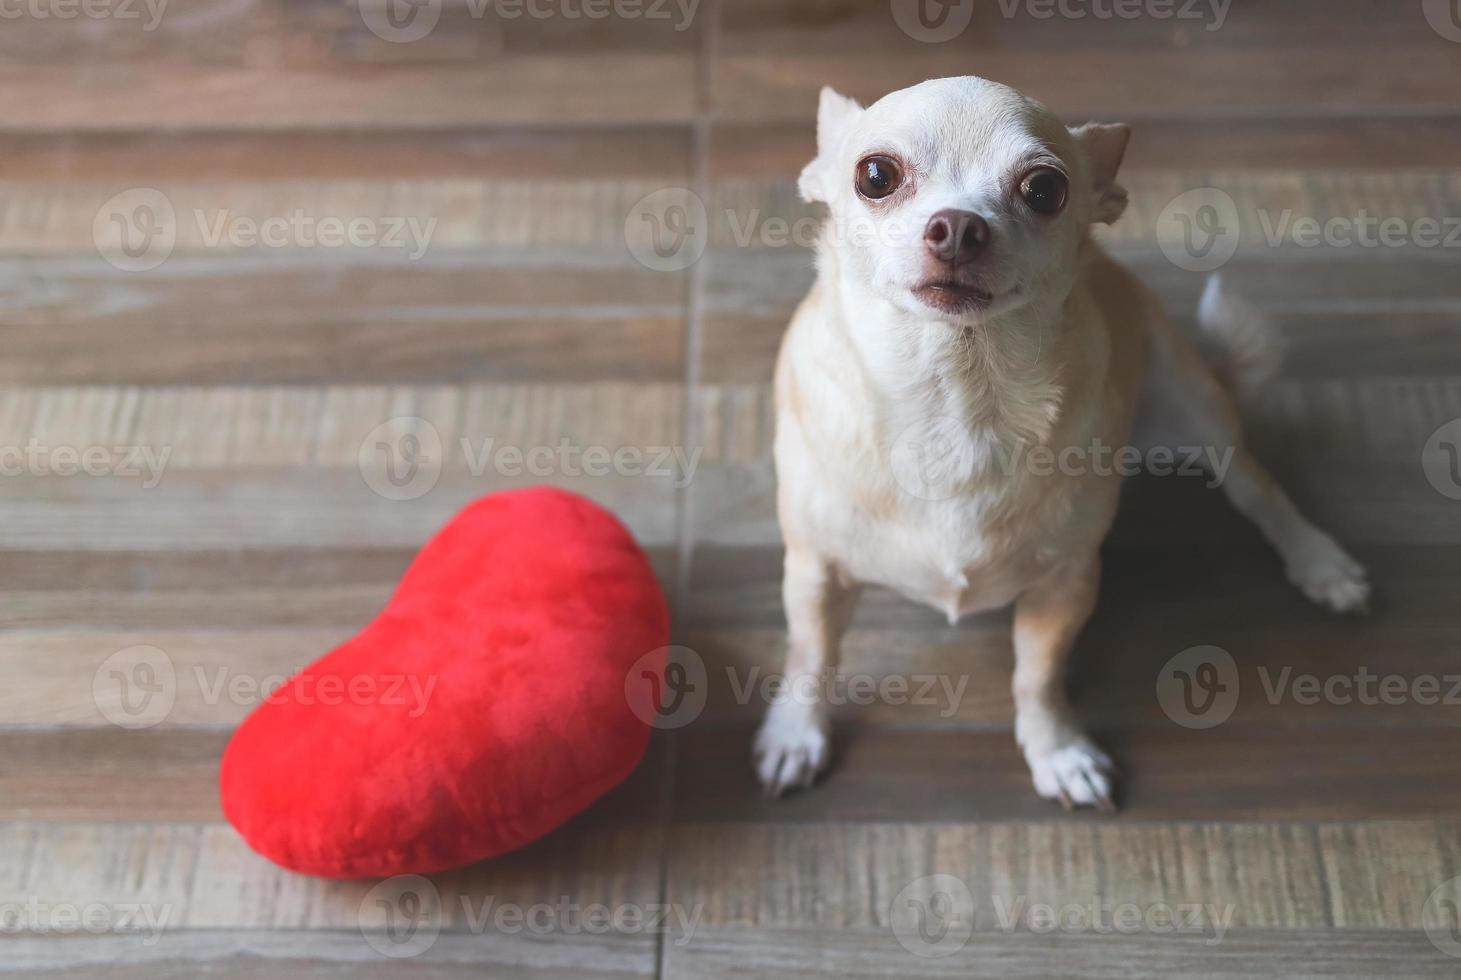 brown Chihuahua dog sitting  with red heart shape pillow.  Valentine's day concept. photo